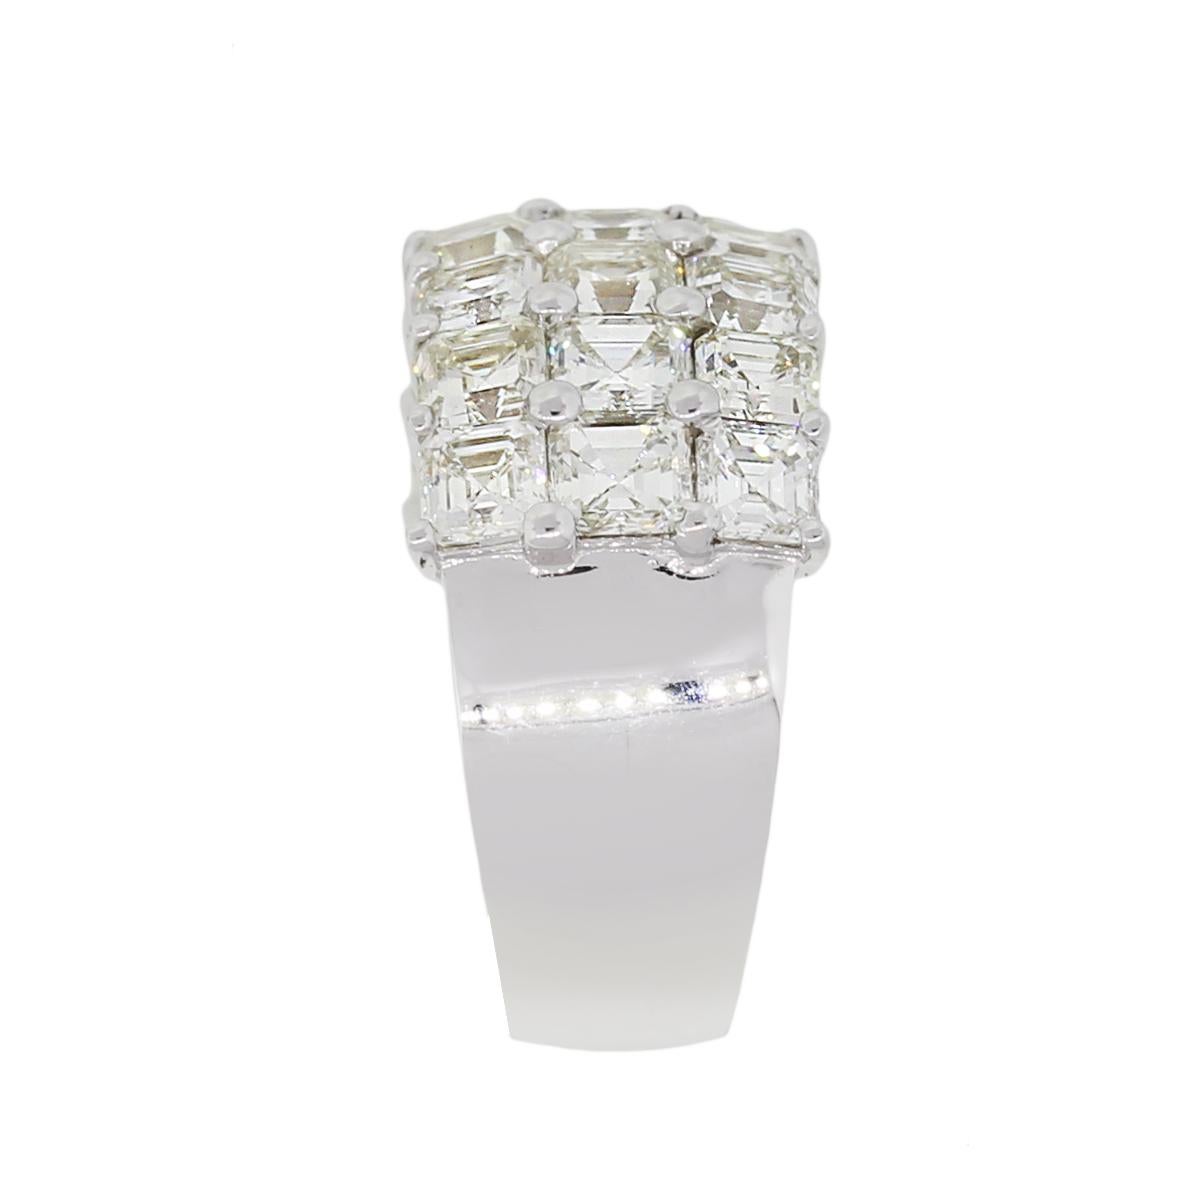 Material: 18k White Gold
Diamond Details: Approximately 6.16ctw of Asscher cut diamonds. Diamonds are G/H in color and VS in clarity.
Ring Size: 6.75
Ring Measurements: 0.80″ x 0.45″ x 0.85″
Total Weight: 14.8g (9.5dwt)
SKU: A30312062